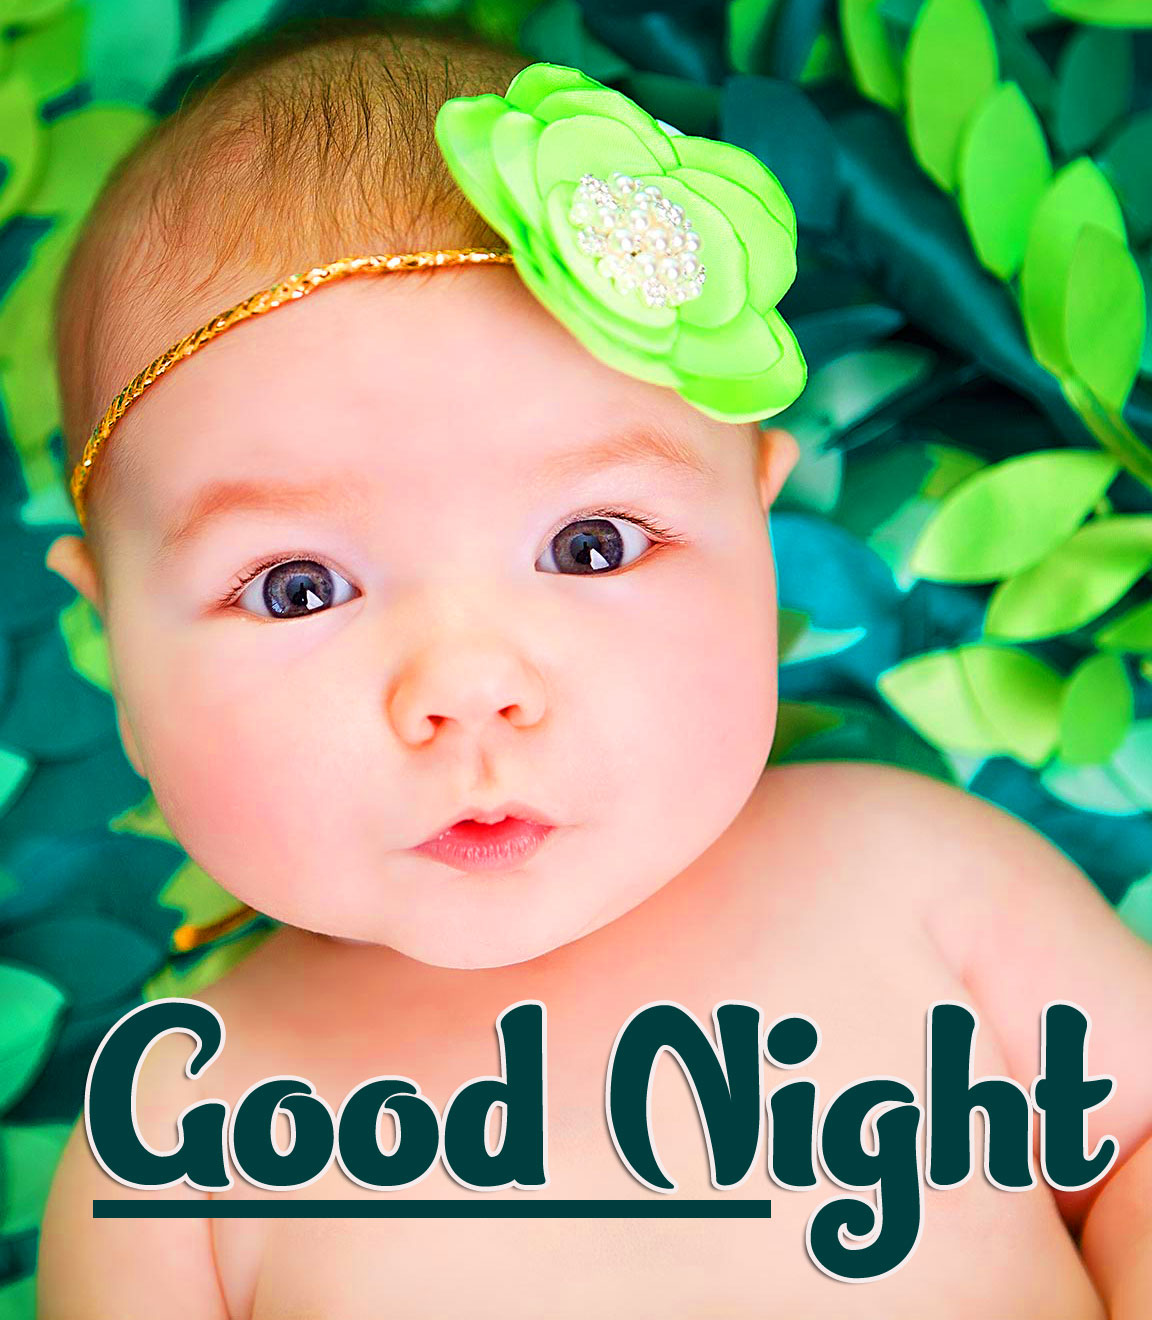 Cute Good Night Images Pics pictures Free Download 